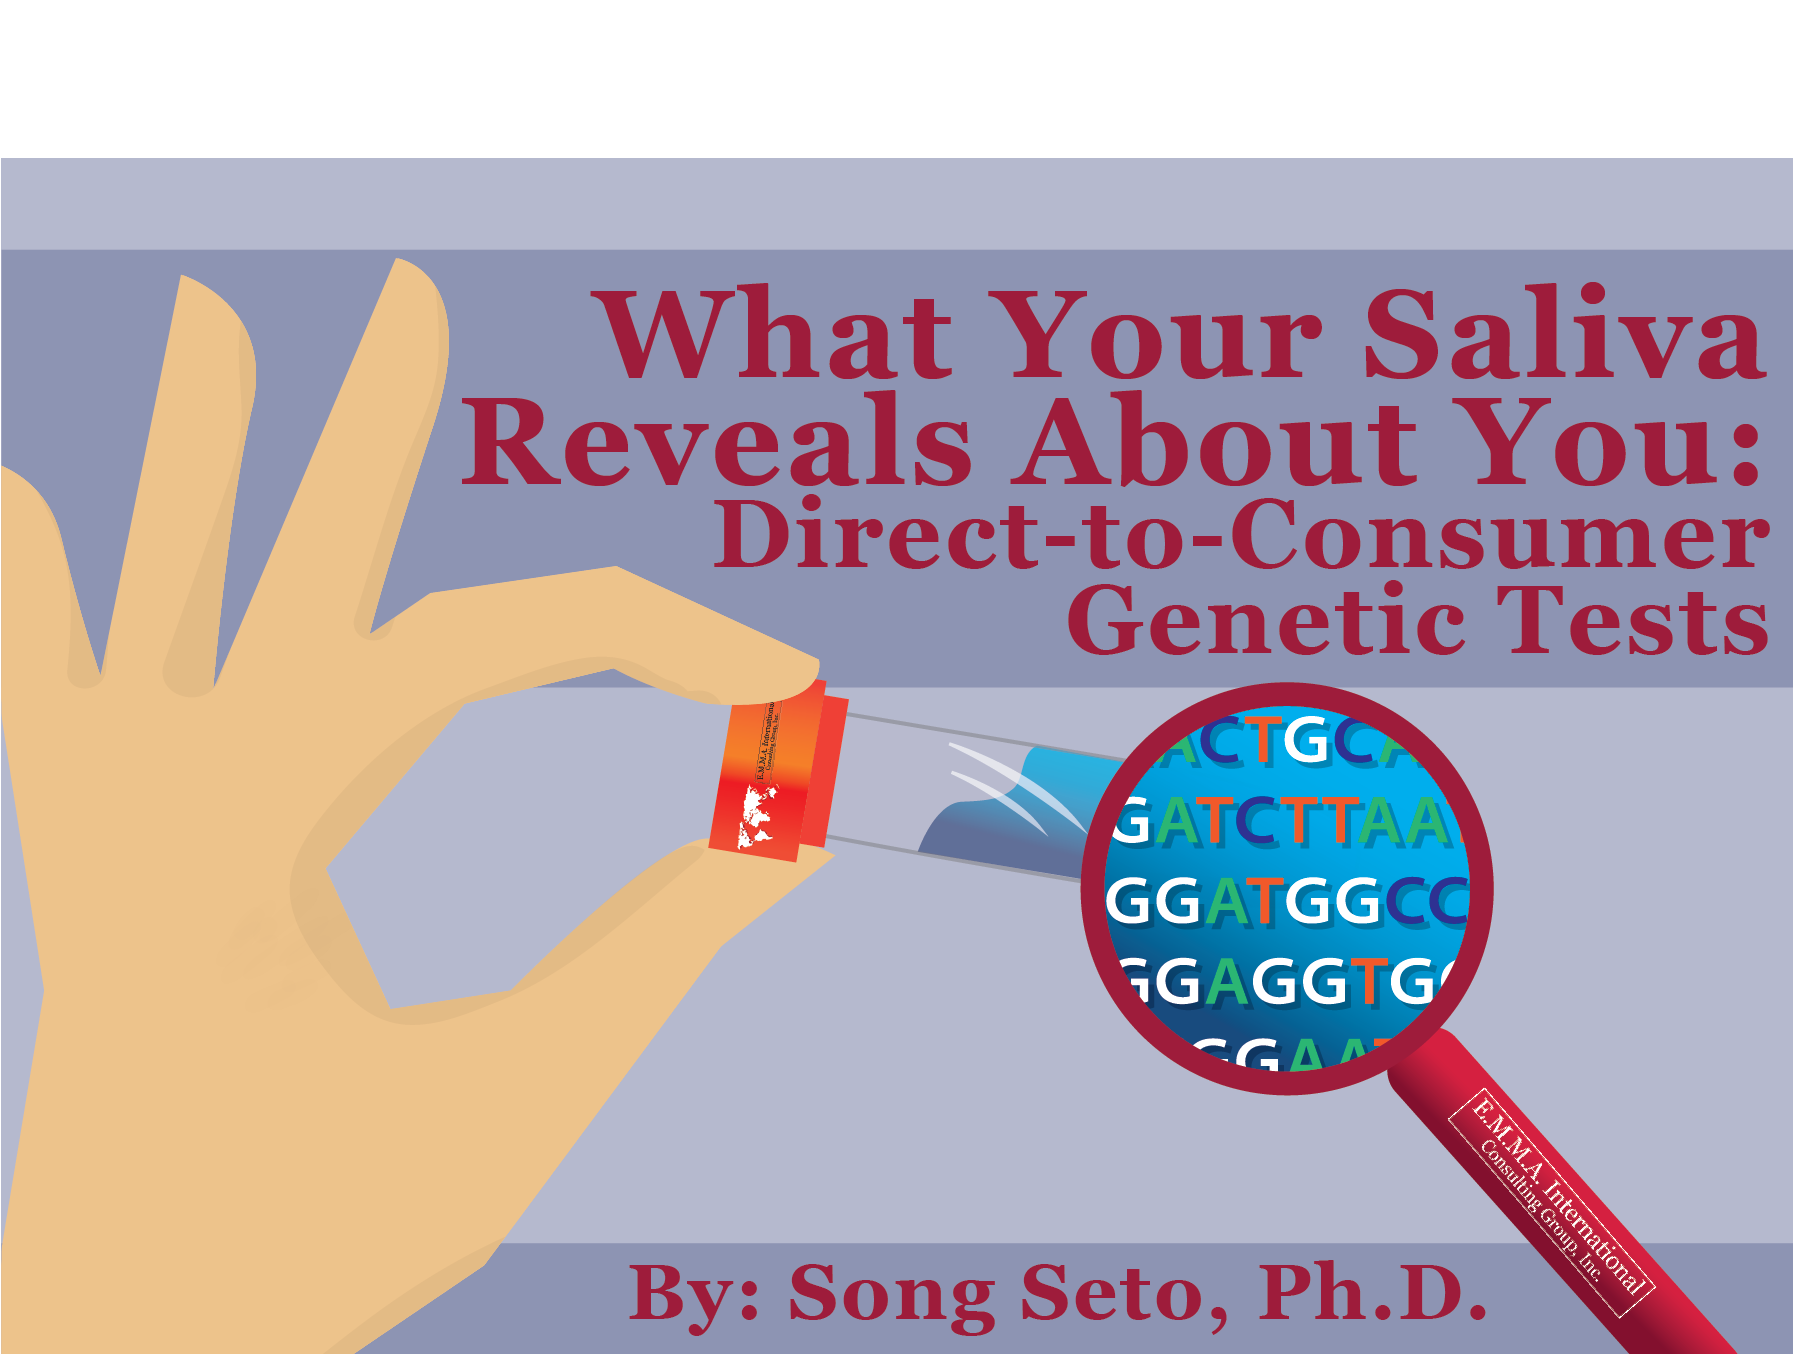 What Your Saliva Reveals About You: Direct-to-Consumer Genetic Tests